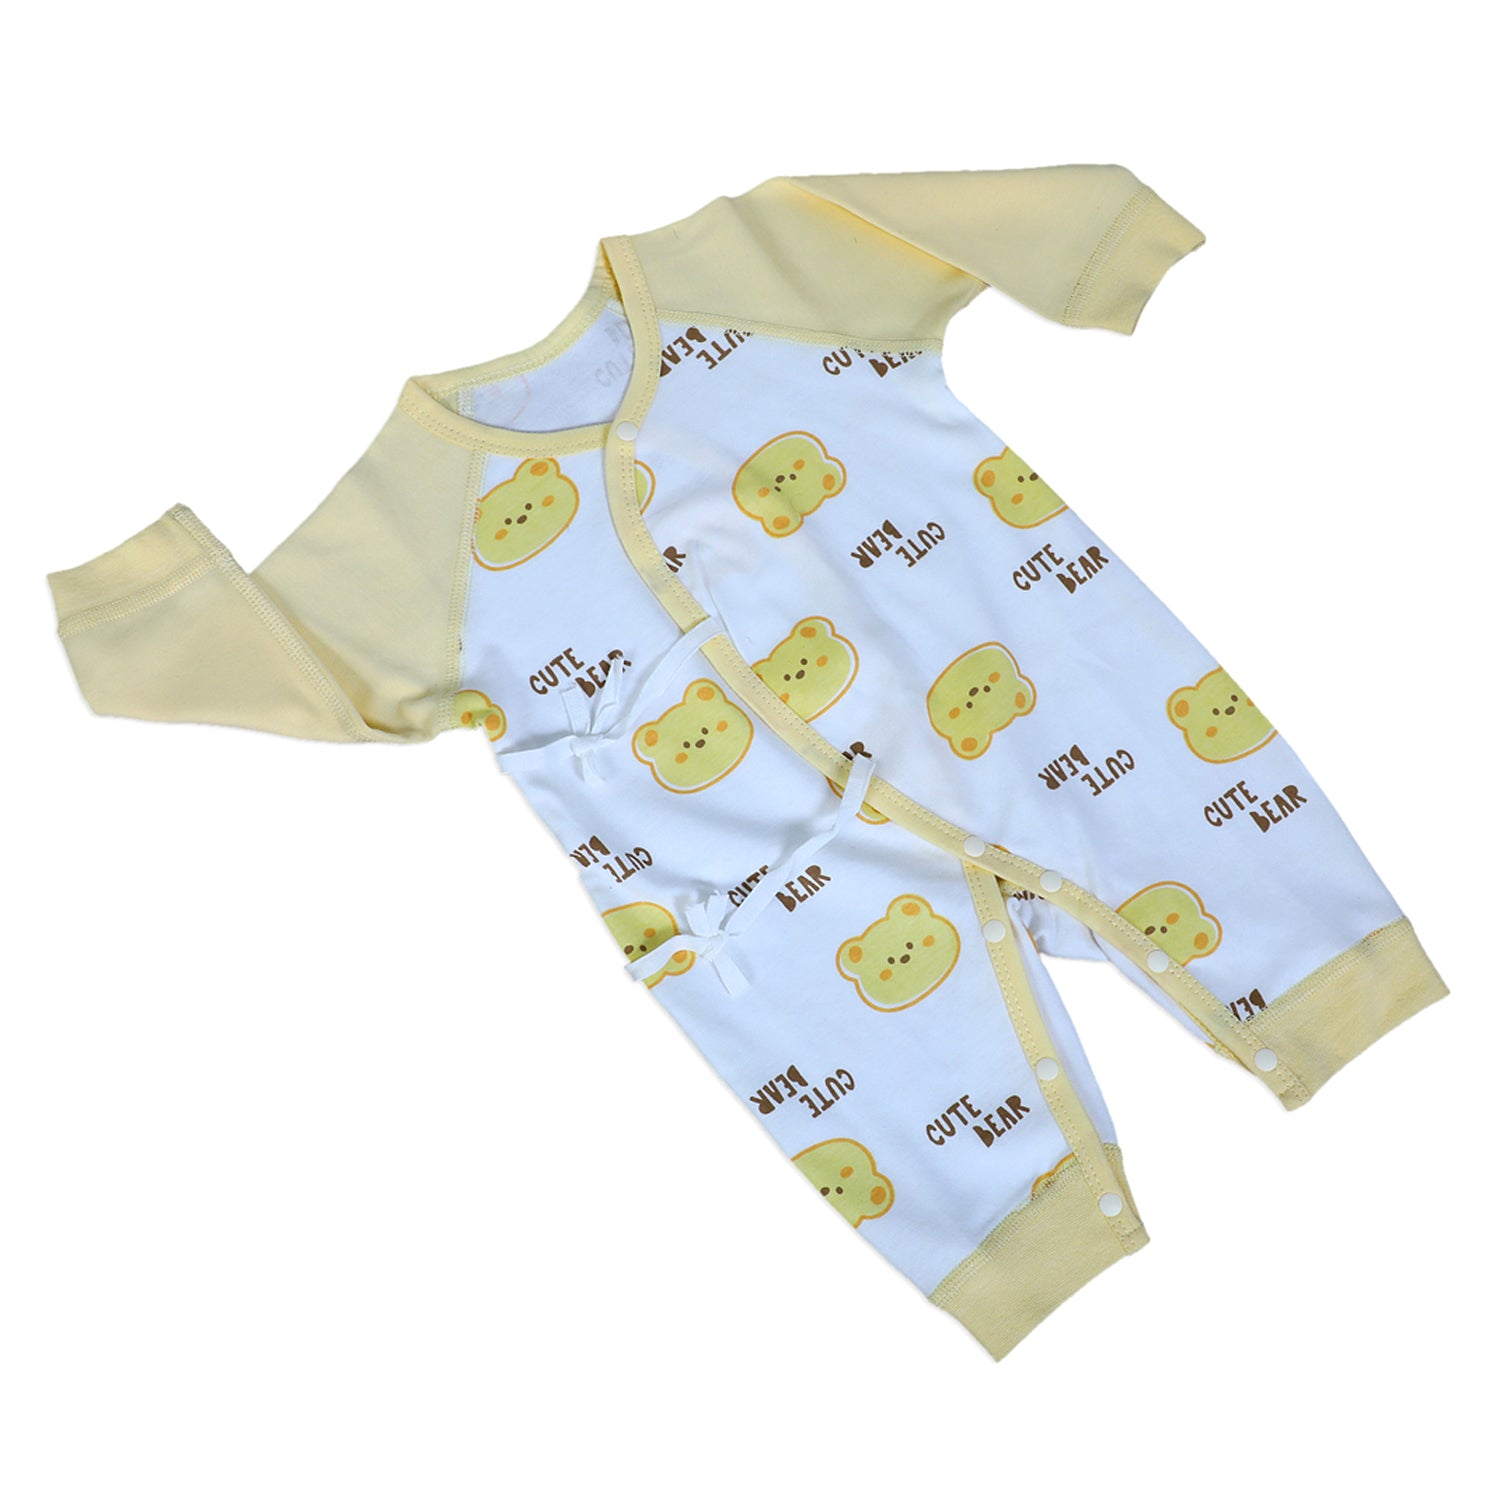 Cute Bear Full Sleeves One-Piece Body Suit With Snap Buttons Tie Knot And Matching Bib - Yellow - Baby Moo